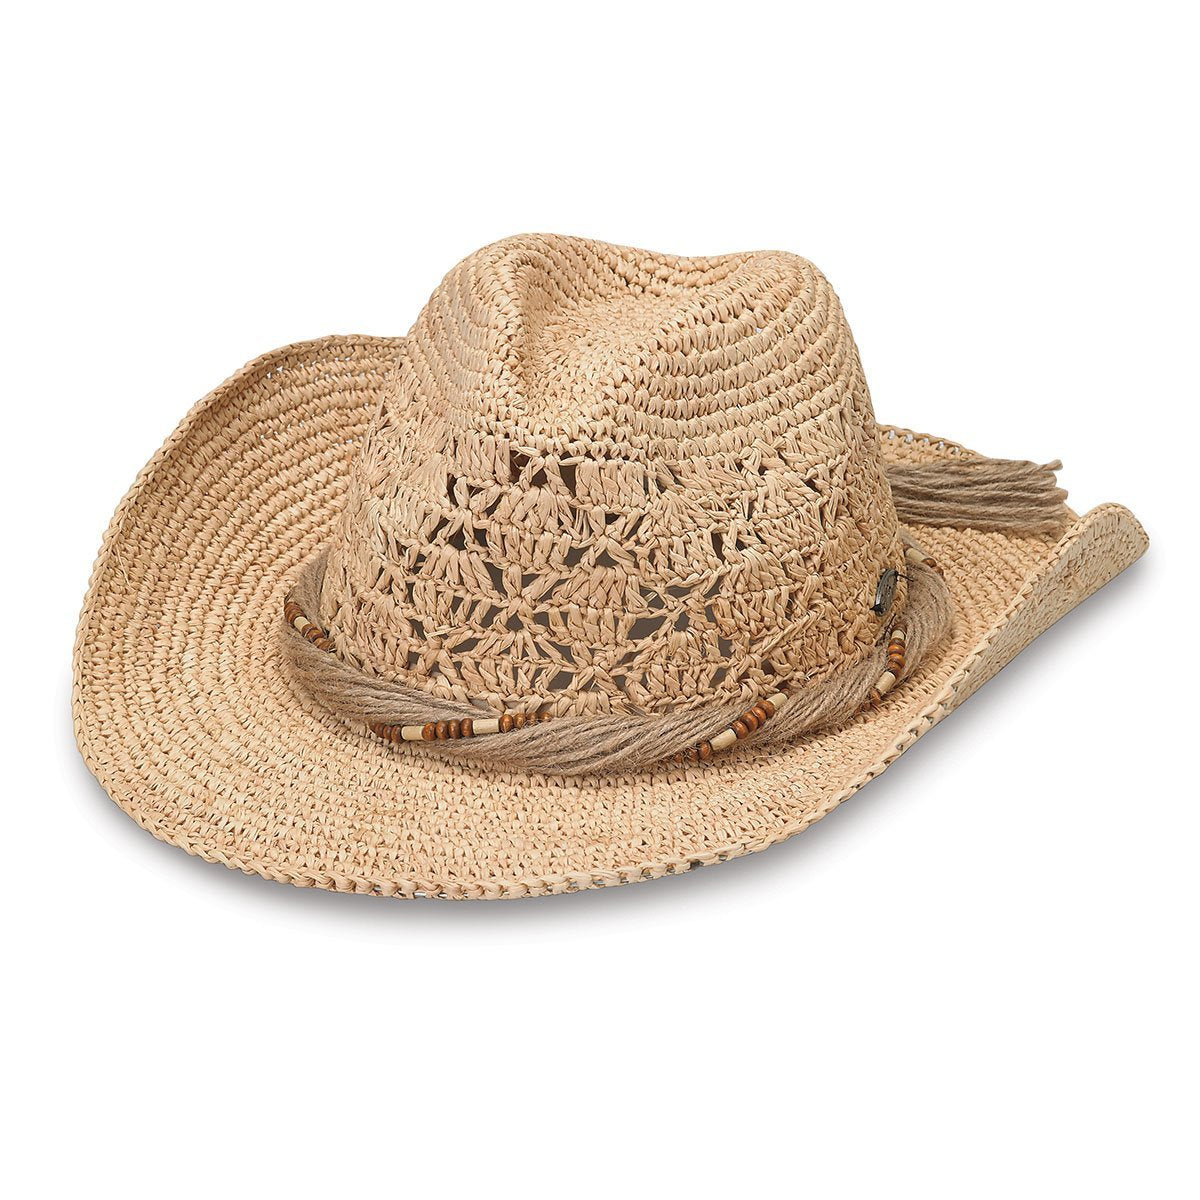 Featuring Front of Women's Tina Straw Cowboy Summer Sun Hat in Natural from Wallaroo